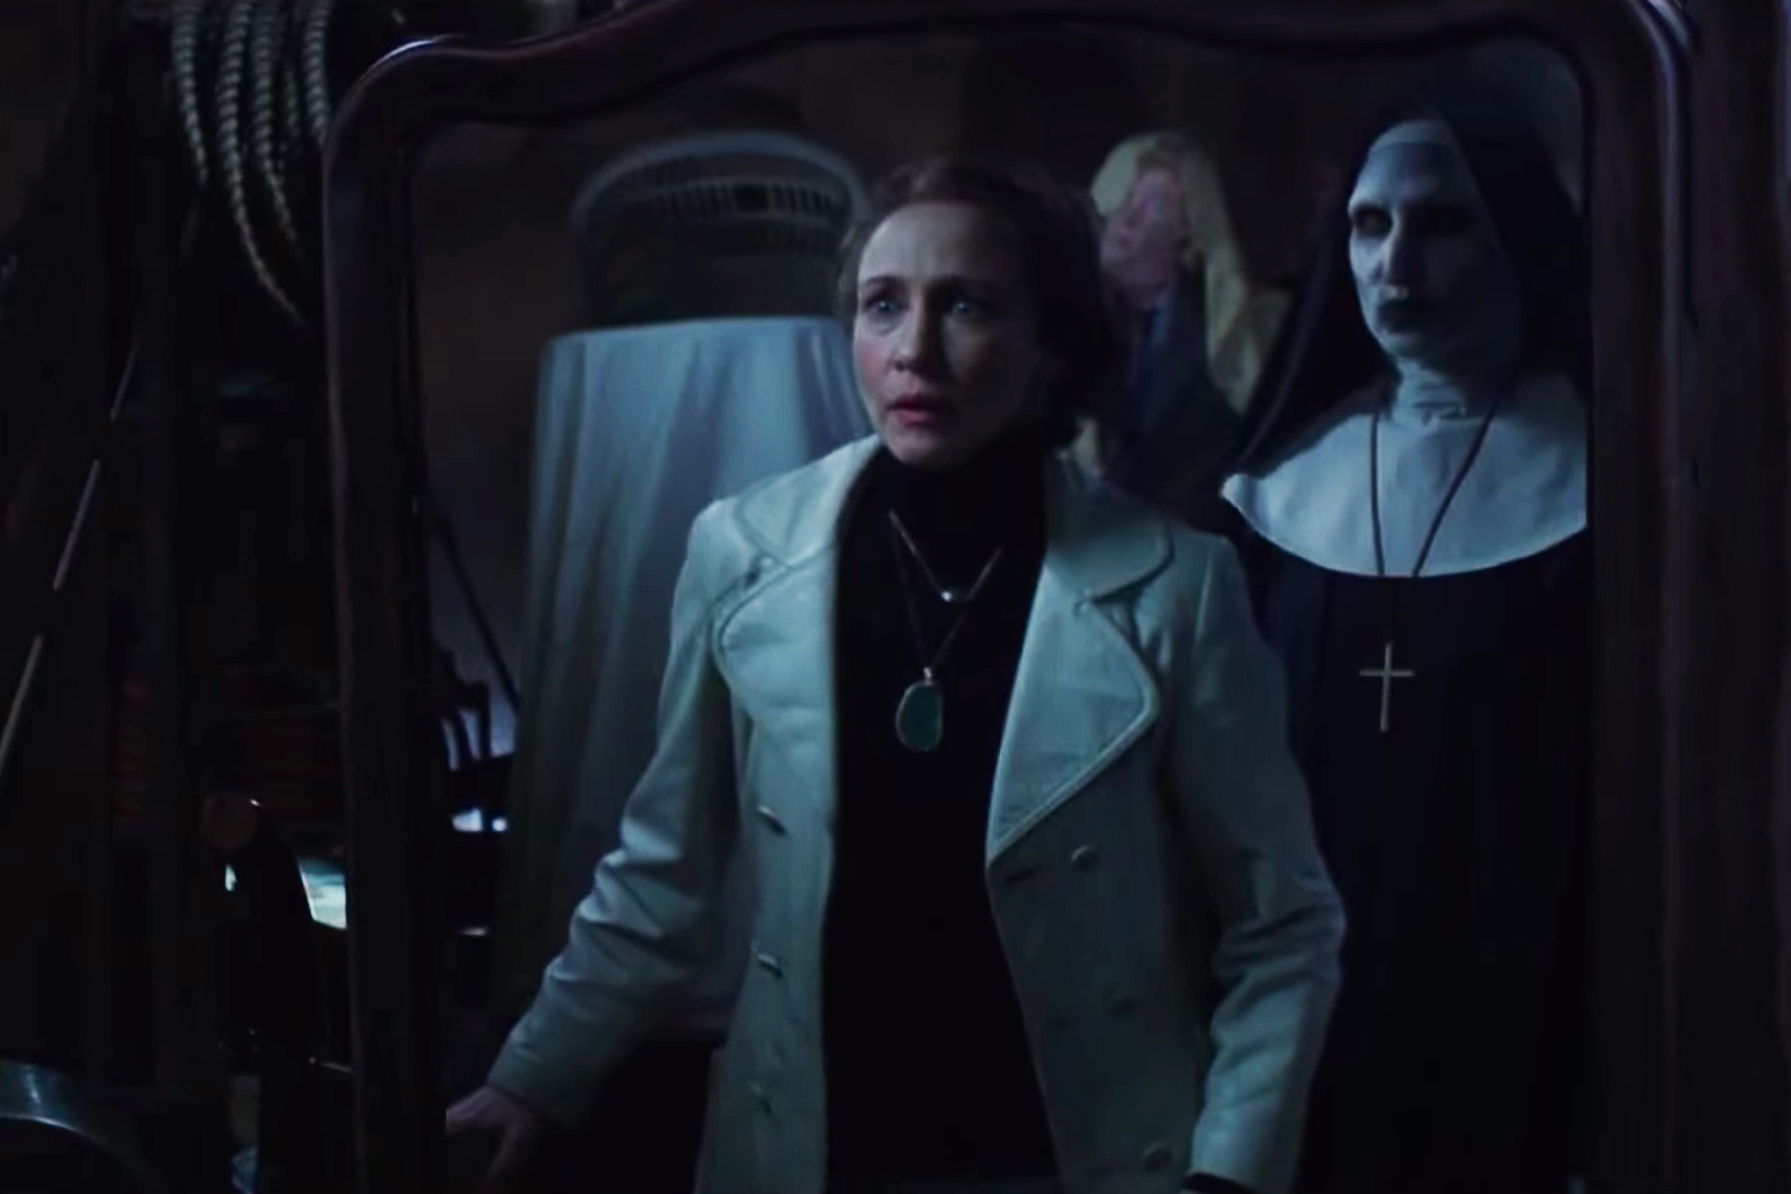 The Conjuring 2 #20